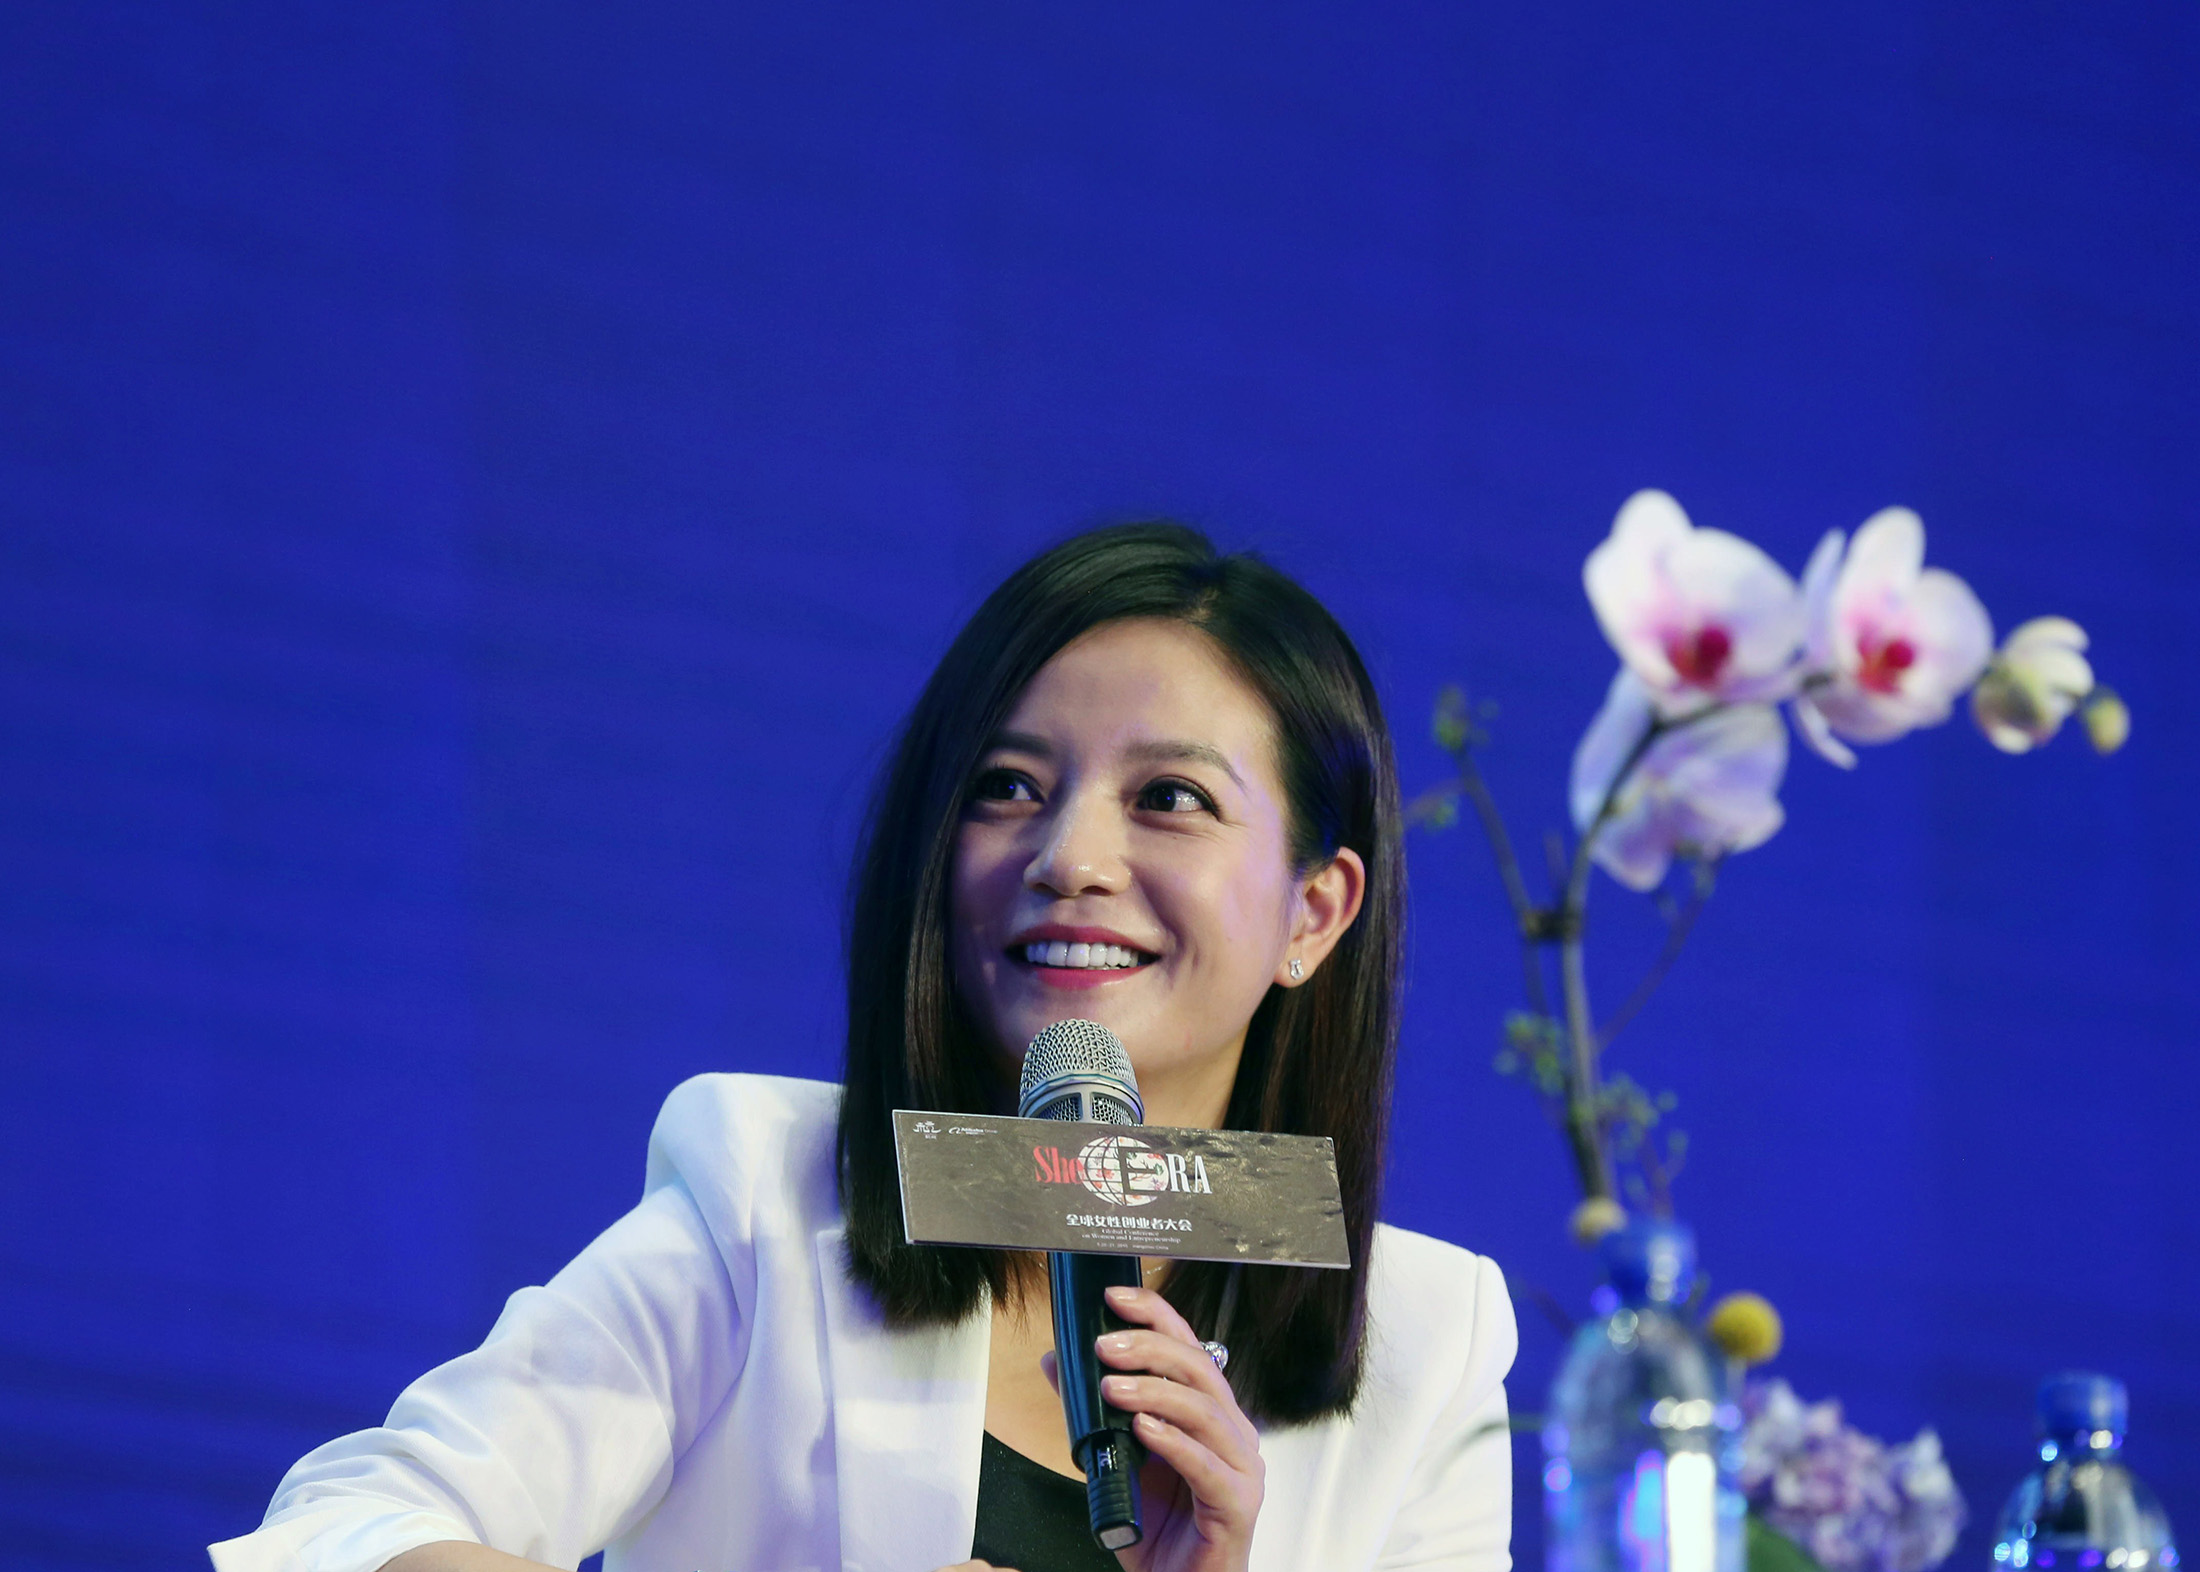 Zhao Wei, Kris Wu, Zhang Zhehan: the Chinese stars hit by China's  entertainment crackdown and why, as new rules have the industry on edge – ' now it's best to lie low